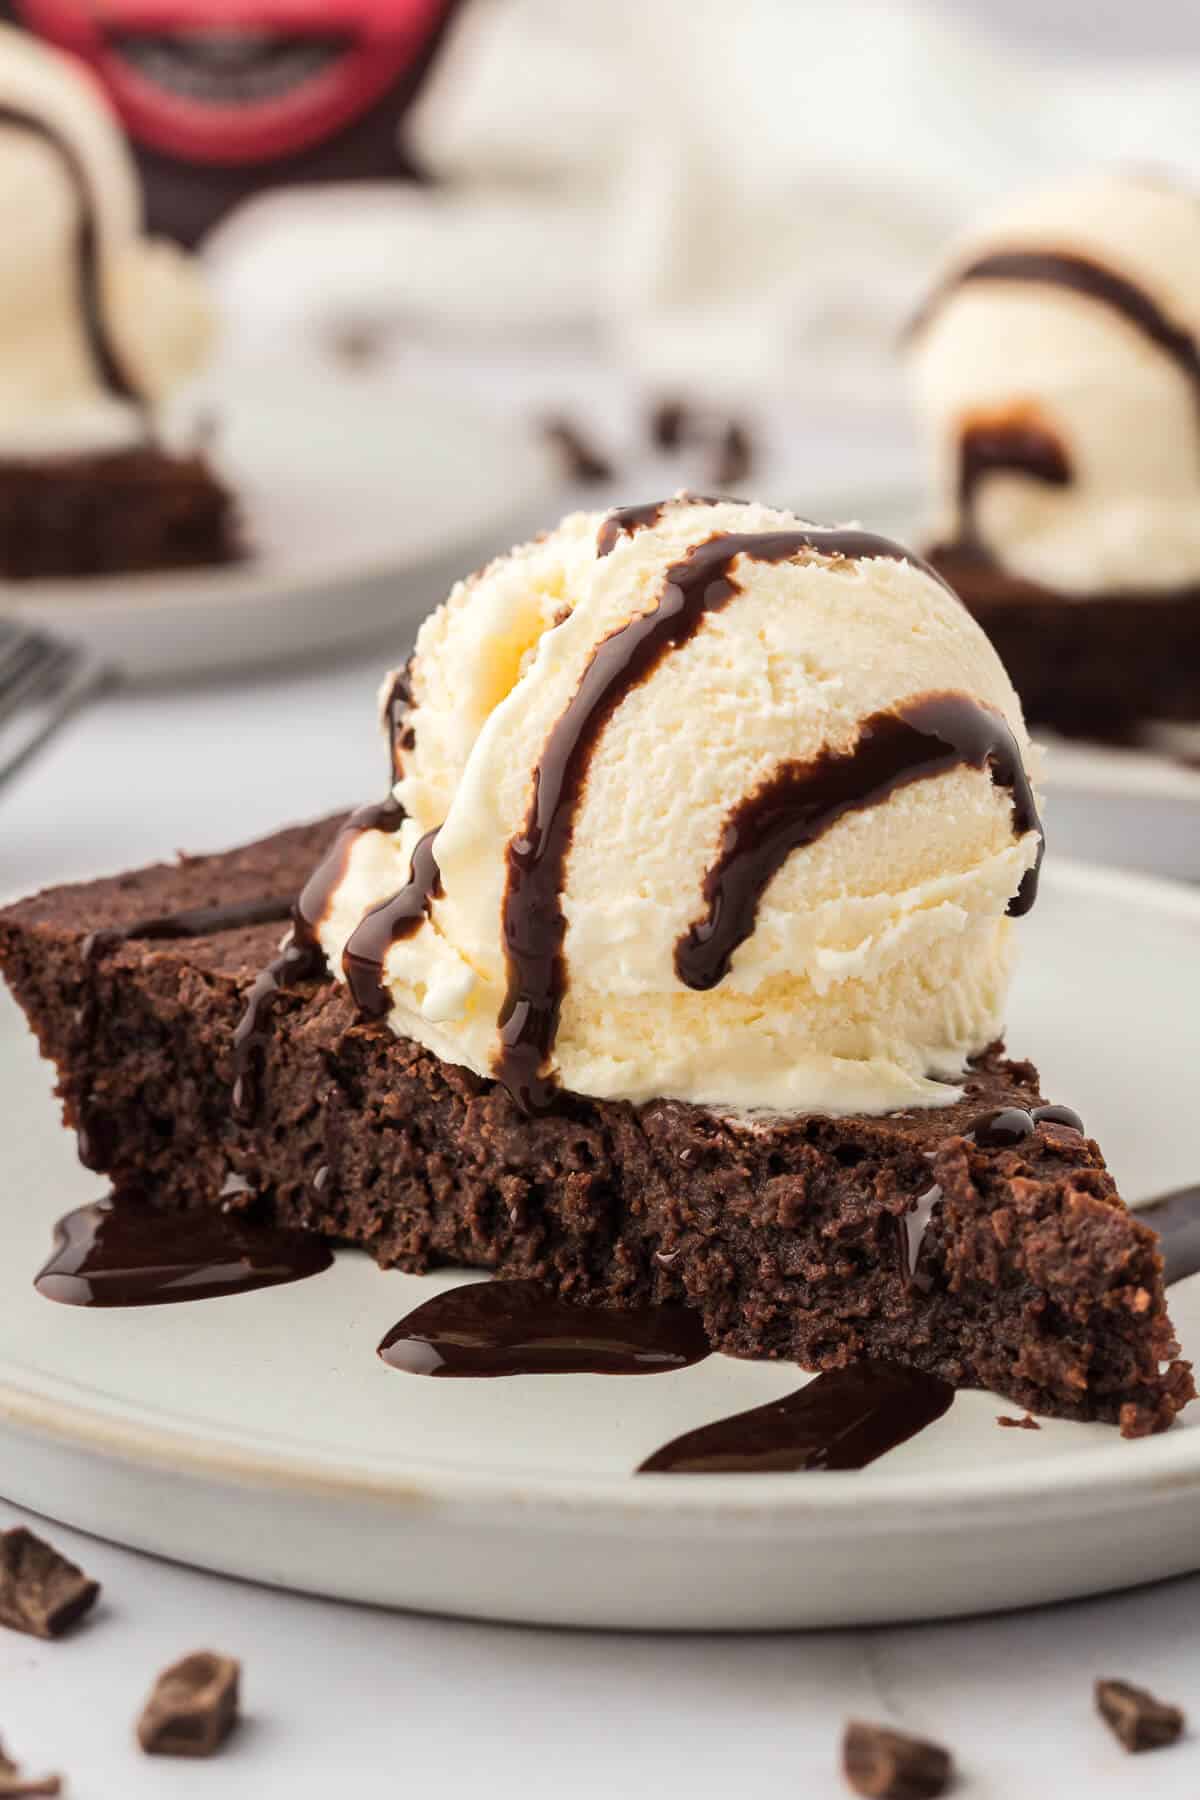 A slice of fudge pie topped with vanilla ice cream and chocolate sauce.